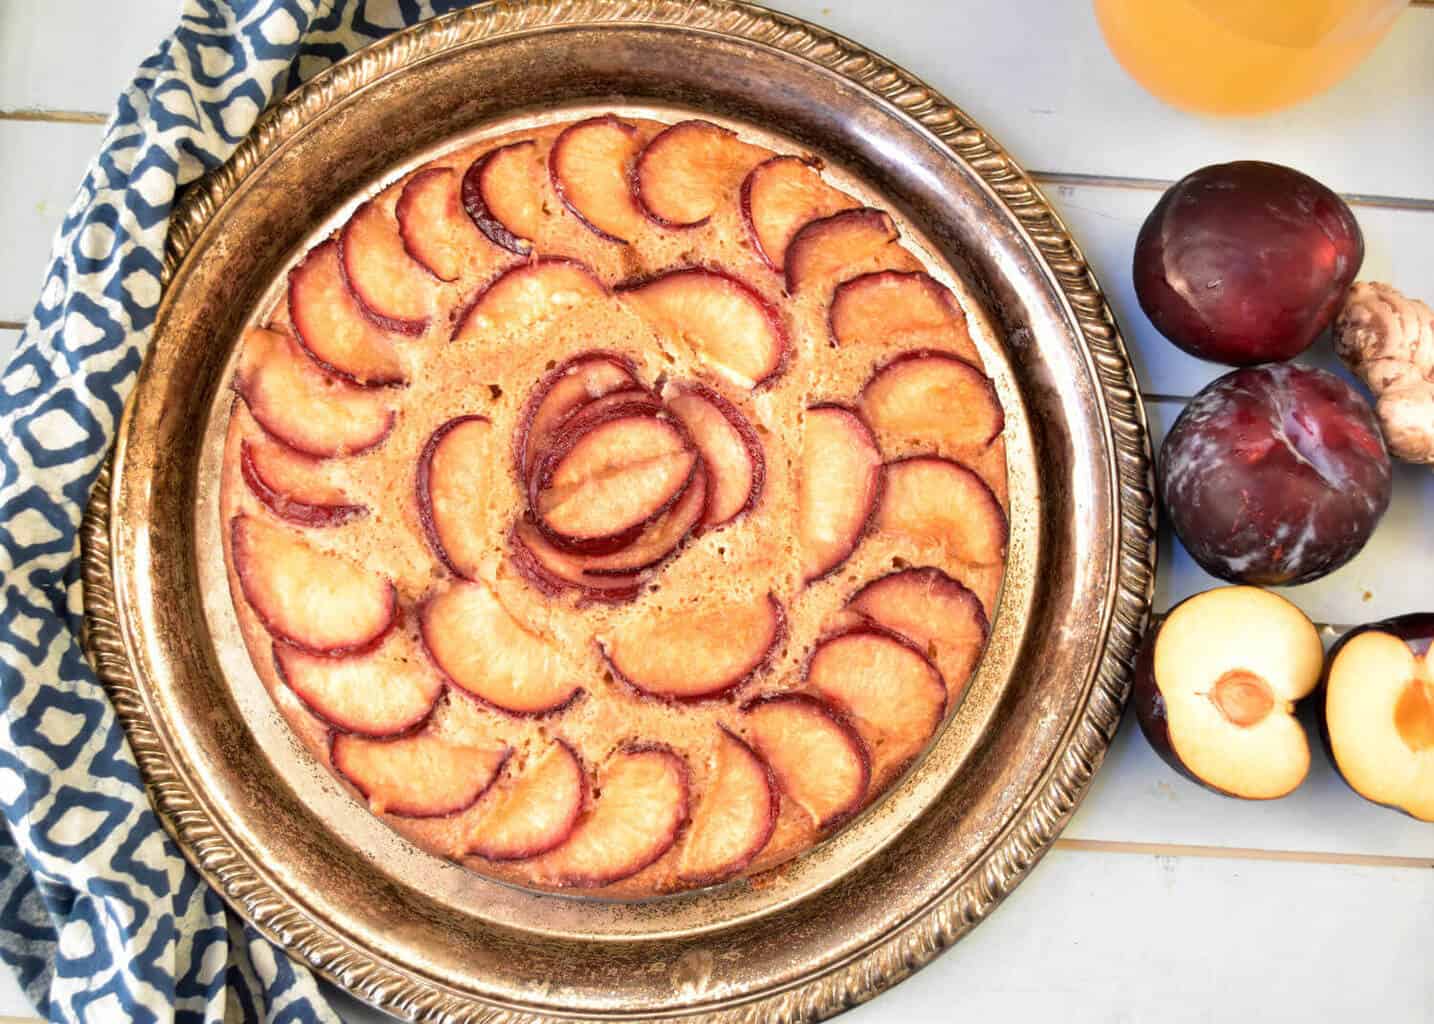 Plum cake with ginger and cardamom